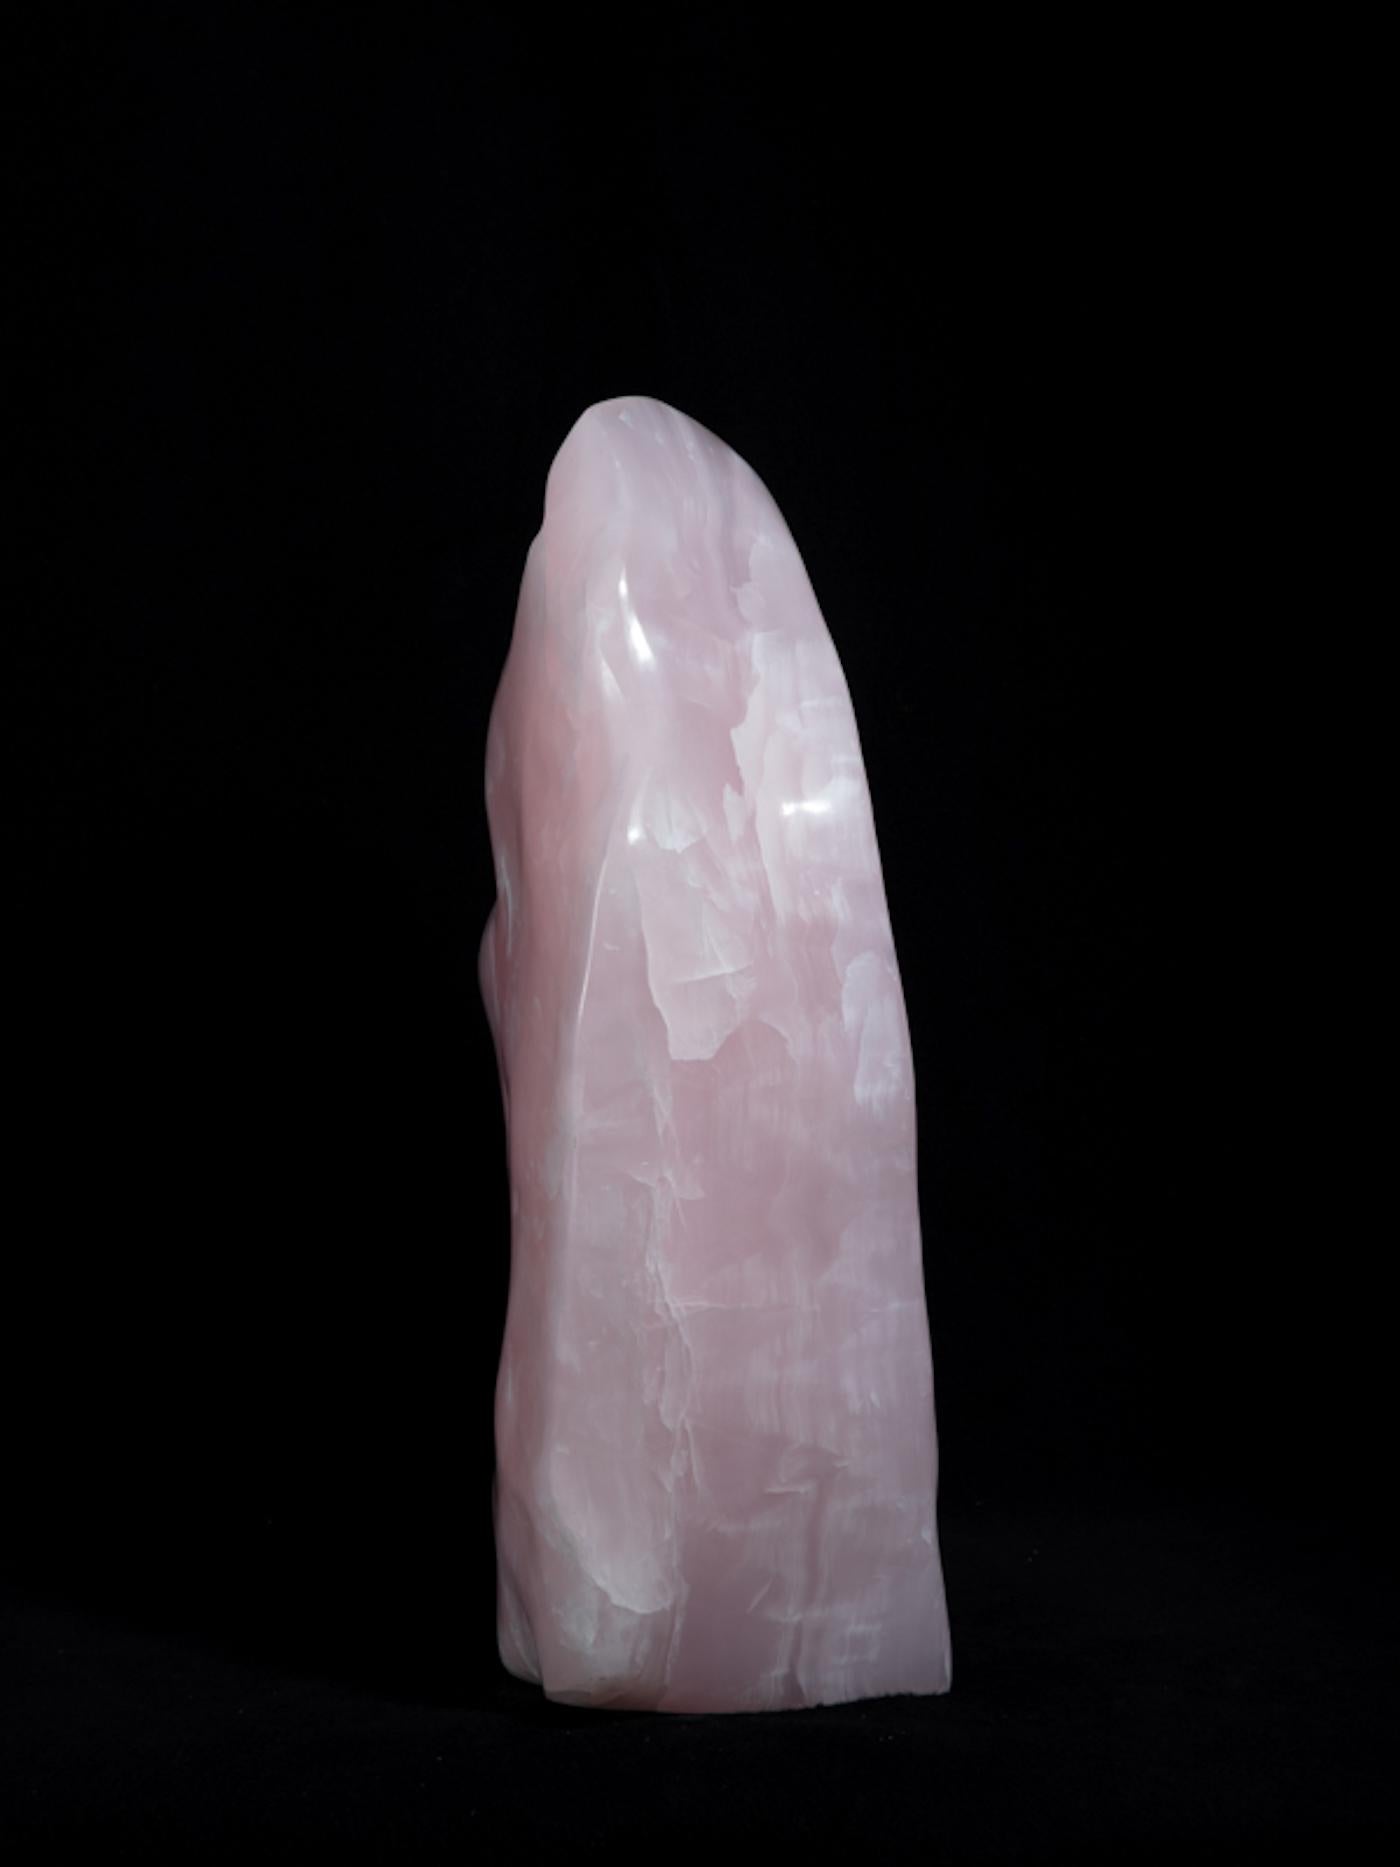 Mangano Calcite is a light pink Calcite variety which shows a very nice fluorescence under the UV lamp